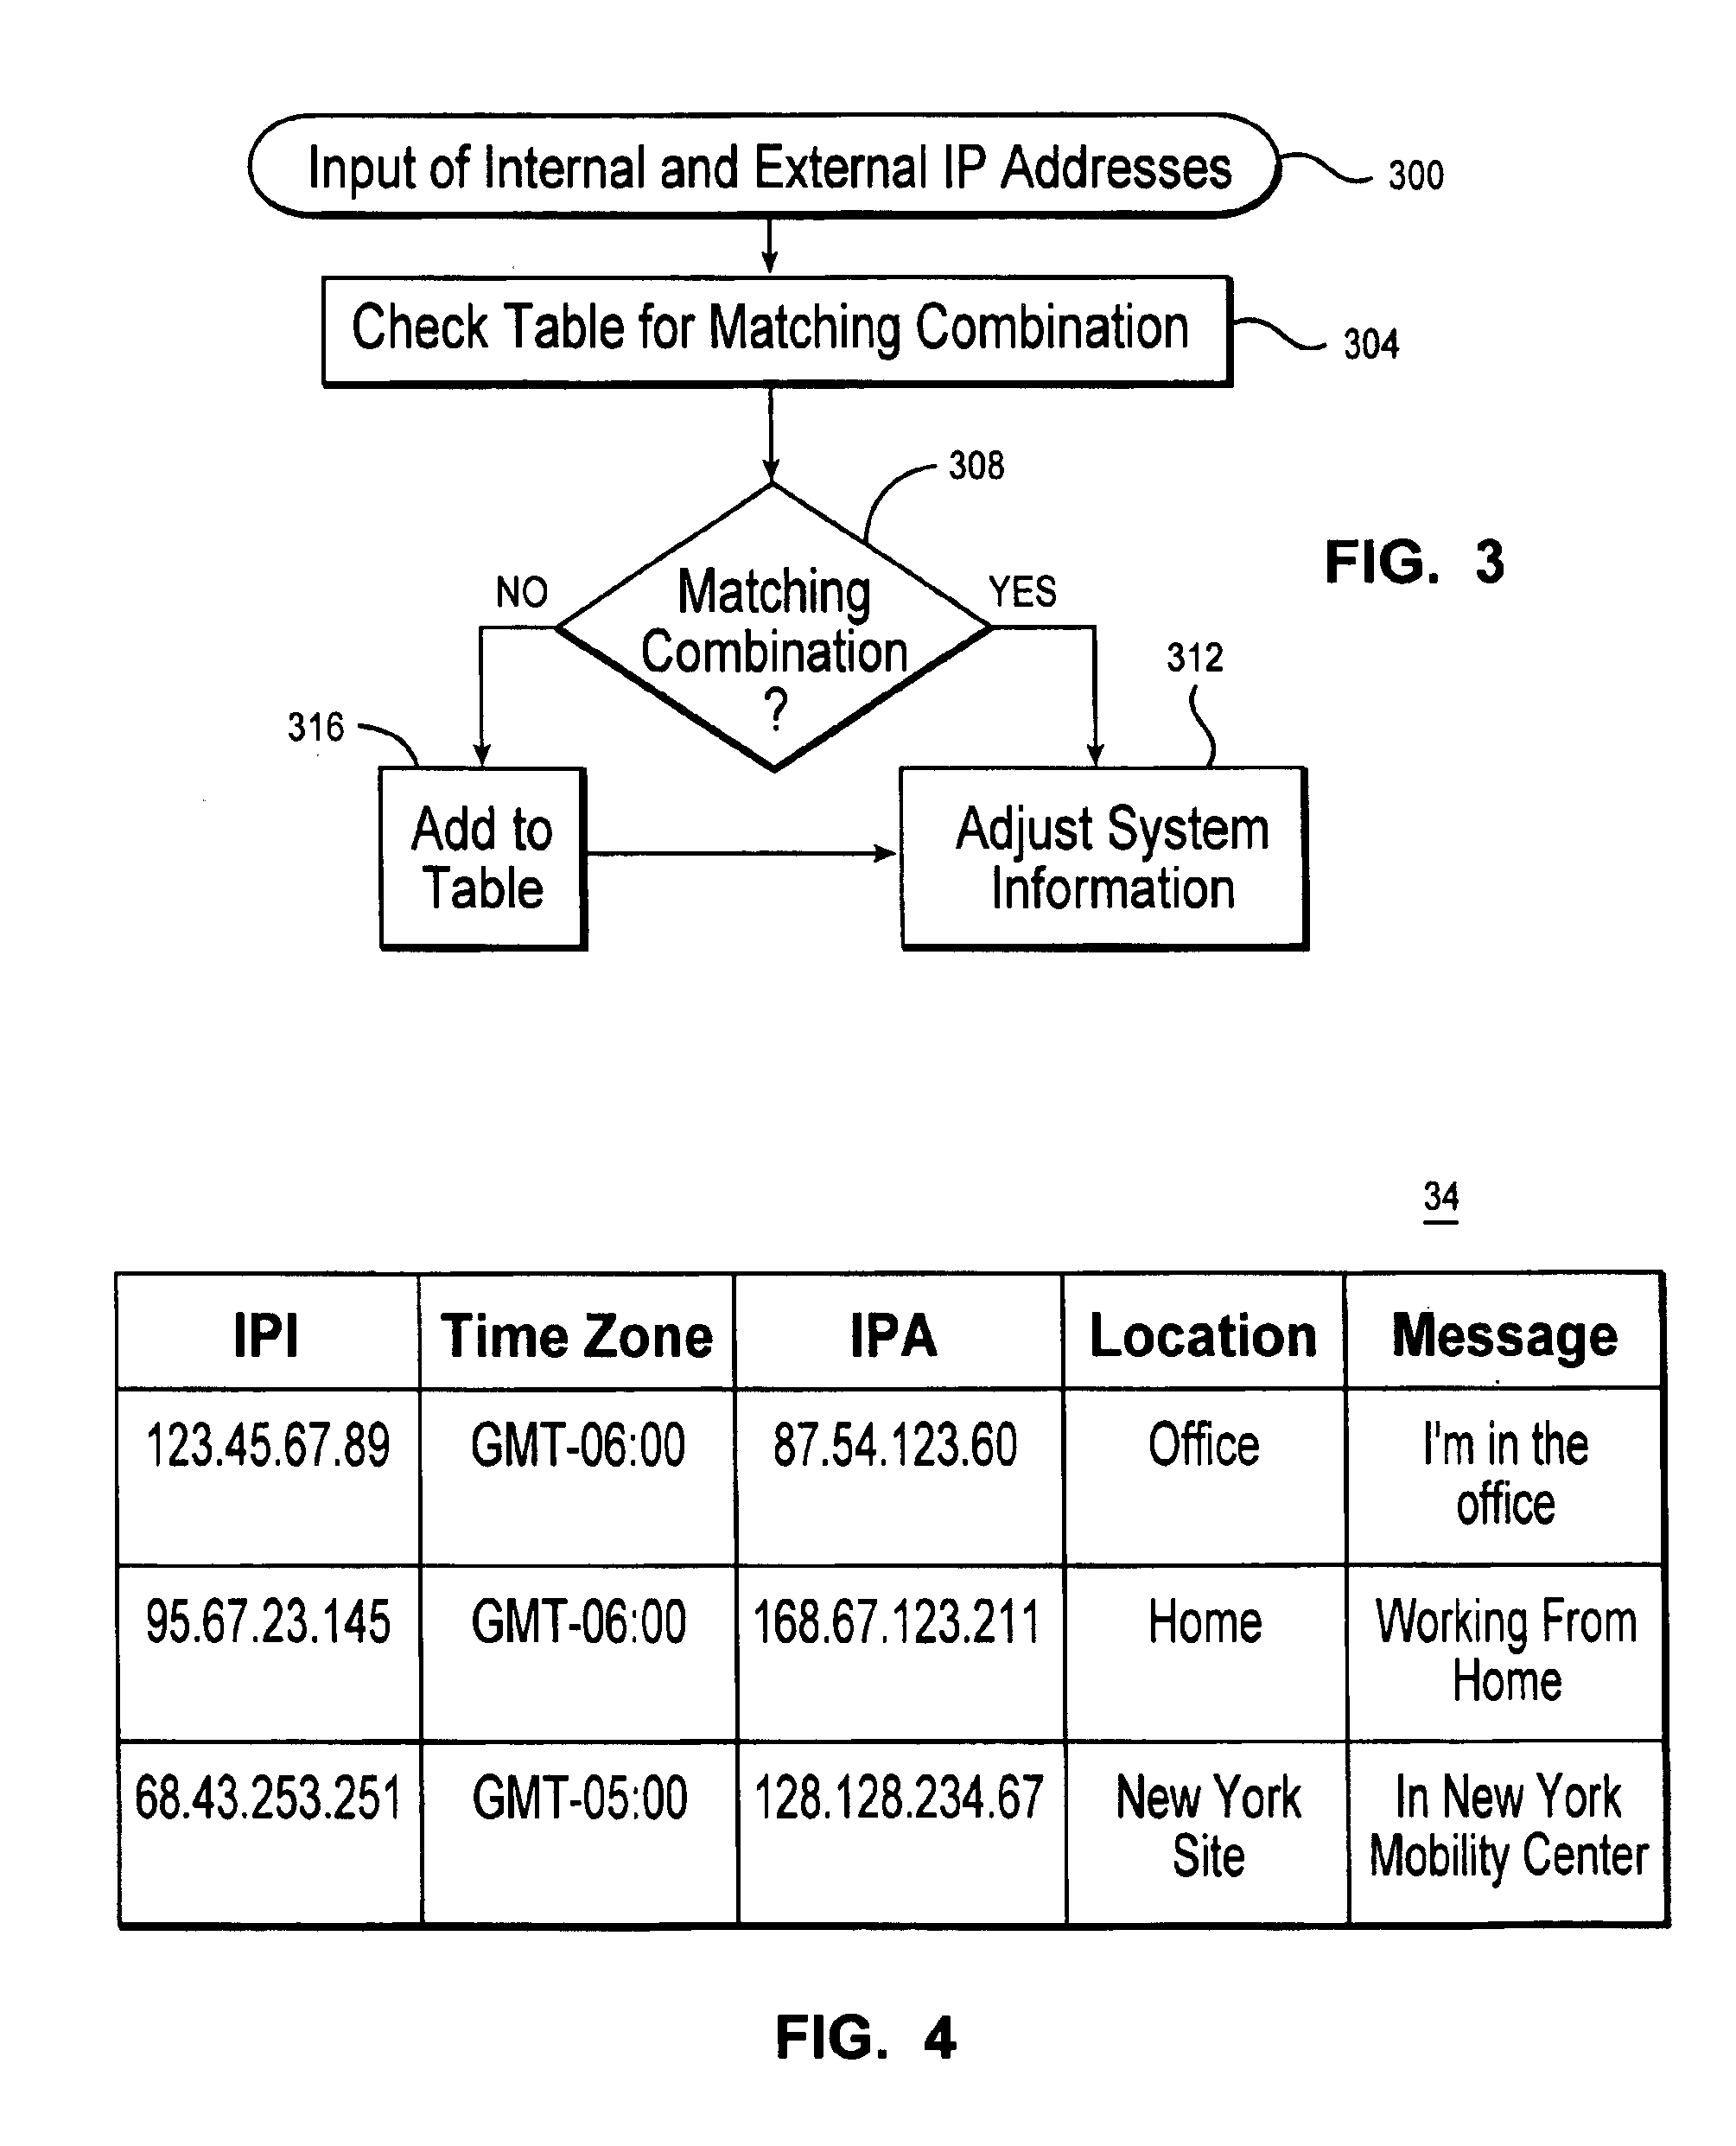 Method and system for automatically adjusting location based system information in a mobile computer